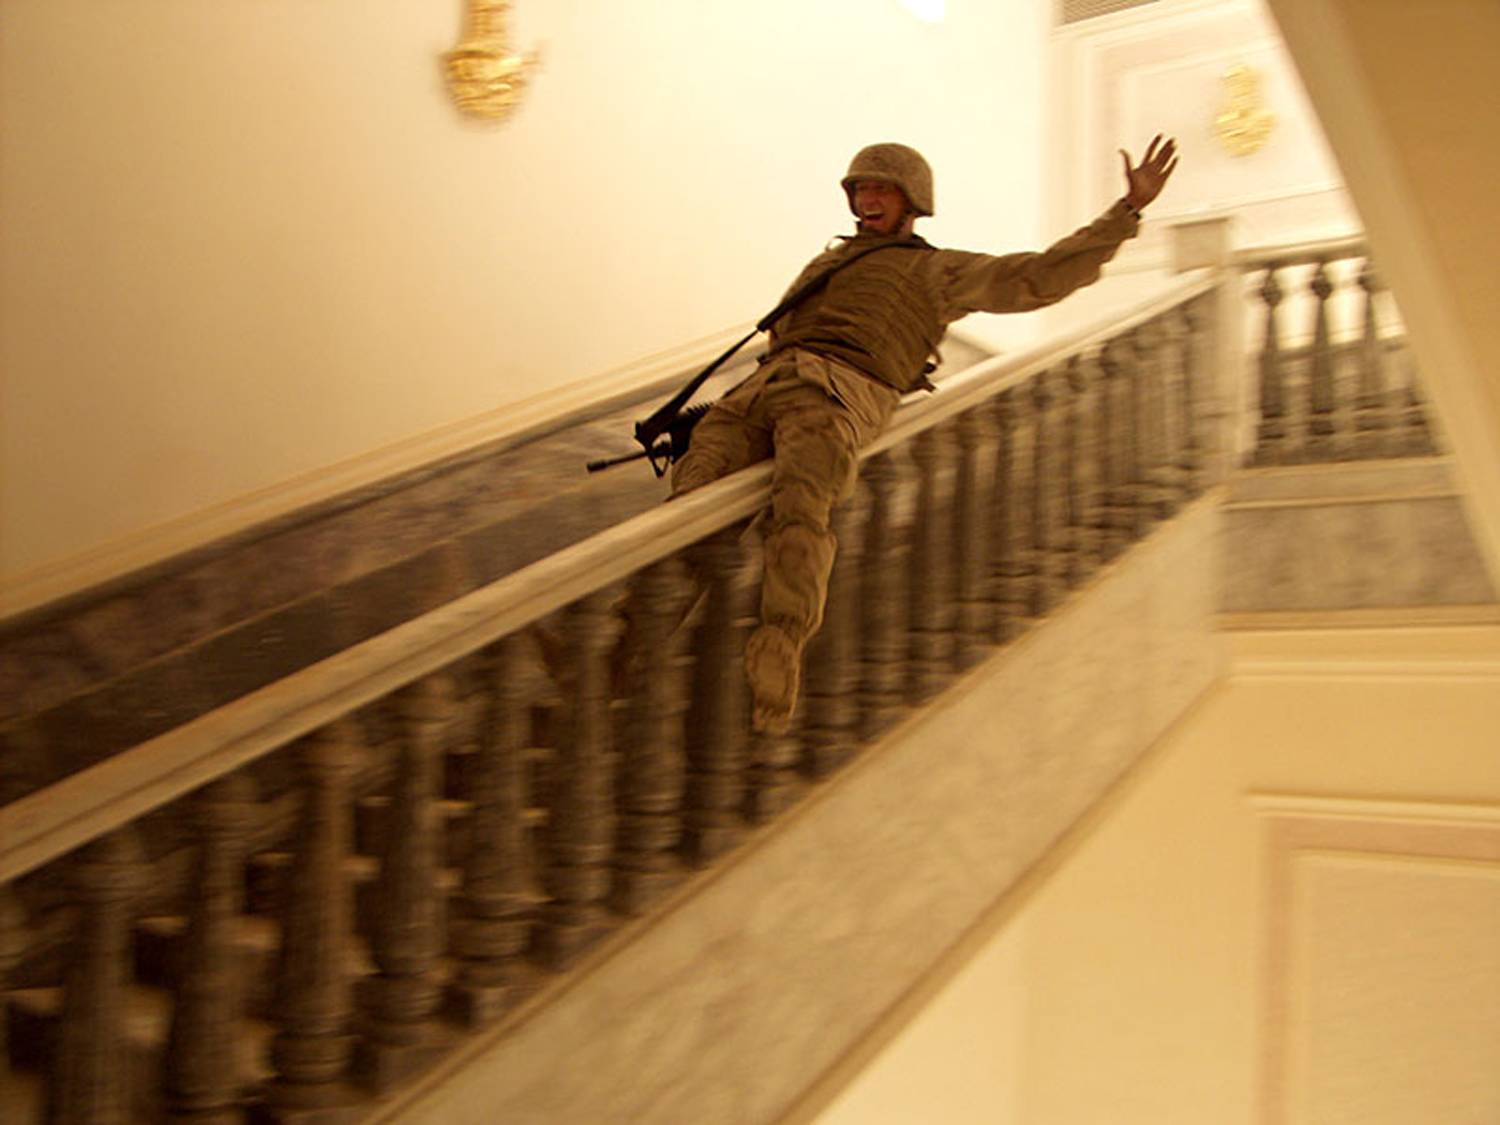 Correct Caption:Tikrit, April 14, 2003 In Saddam's hometown, a US Marine slides down a marble handrail in one of the dictator's extravagant palaces. The residence contained carpets worth hundreds of thousands of dollars and at least one golden toilet. Tikrit was the last major city to fall to Allied forces during the invasion and, despite fighting that continued through Iraq, Marines celebrated victory.Ashley Gilbertson/VII